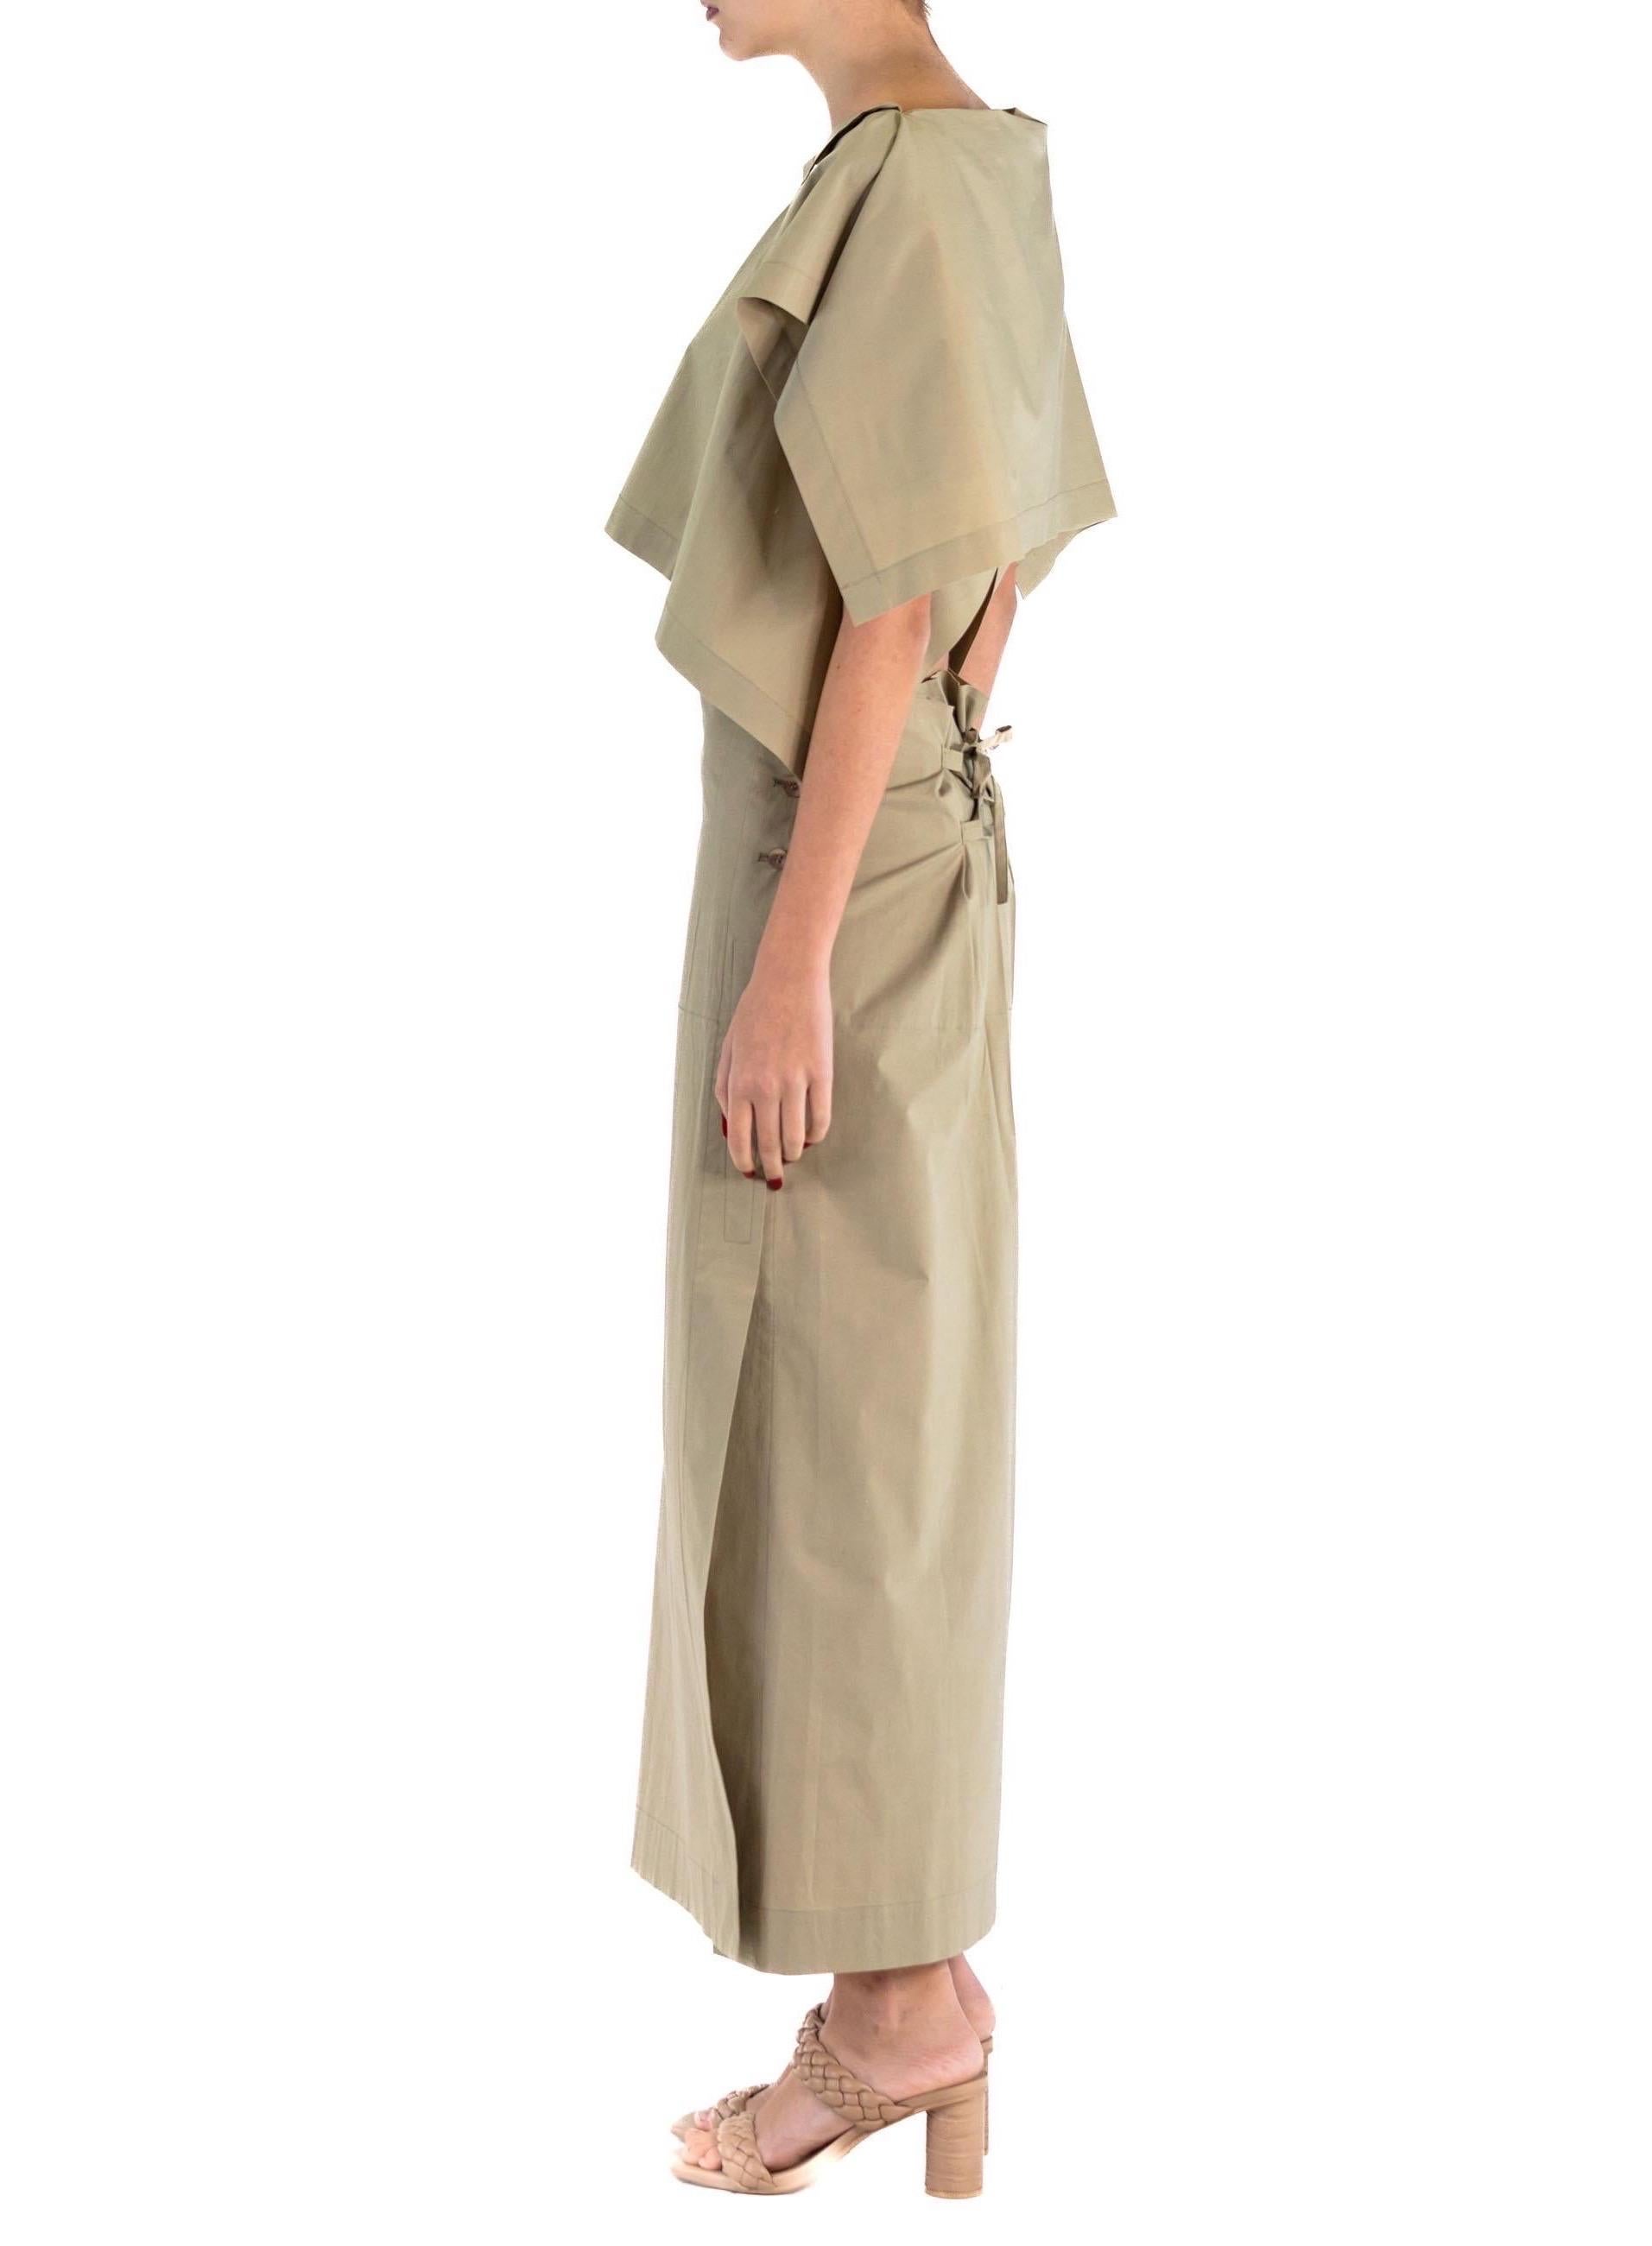 1990S ISSEY MIYAKE Beige Cotton Top And Skirt Ensemble In Excellent Condition For Sale In New York, NY